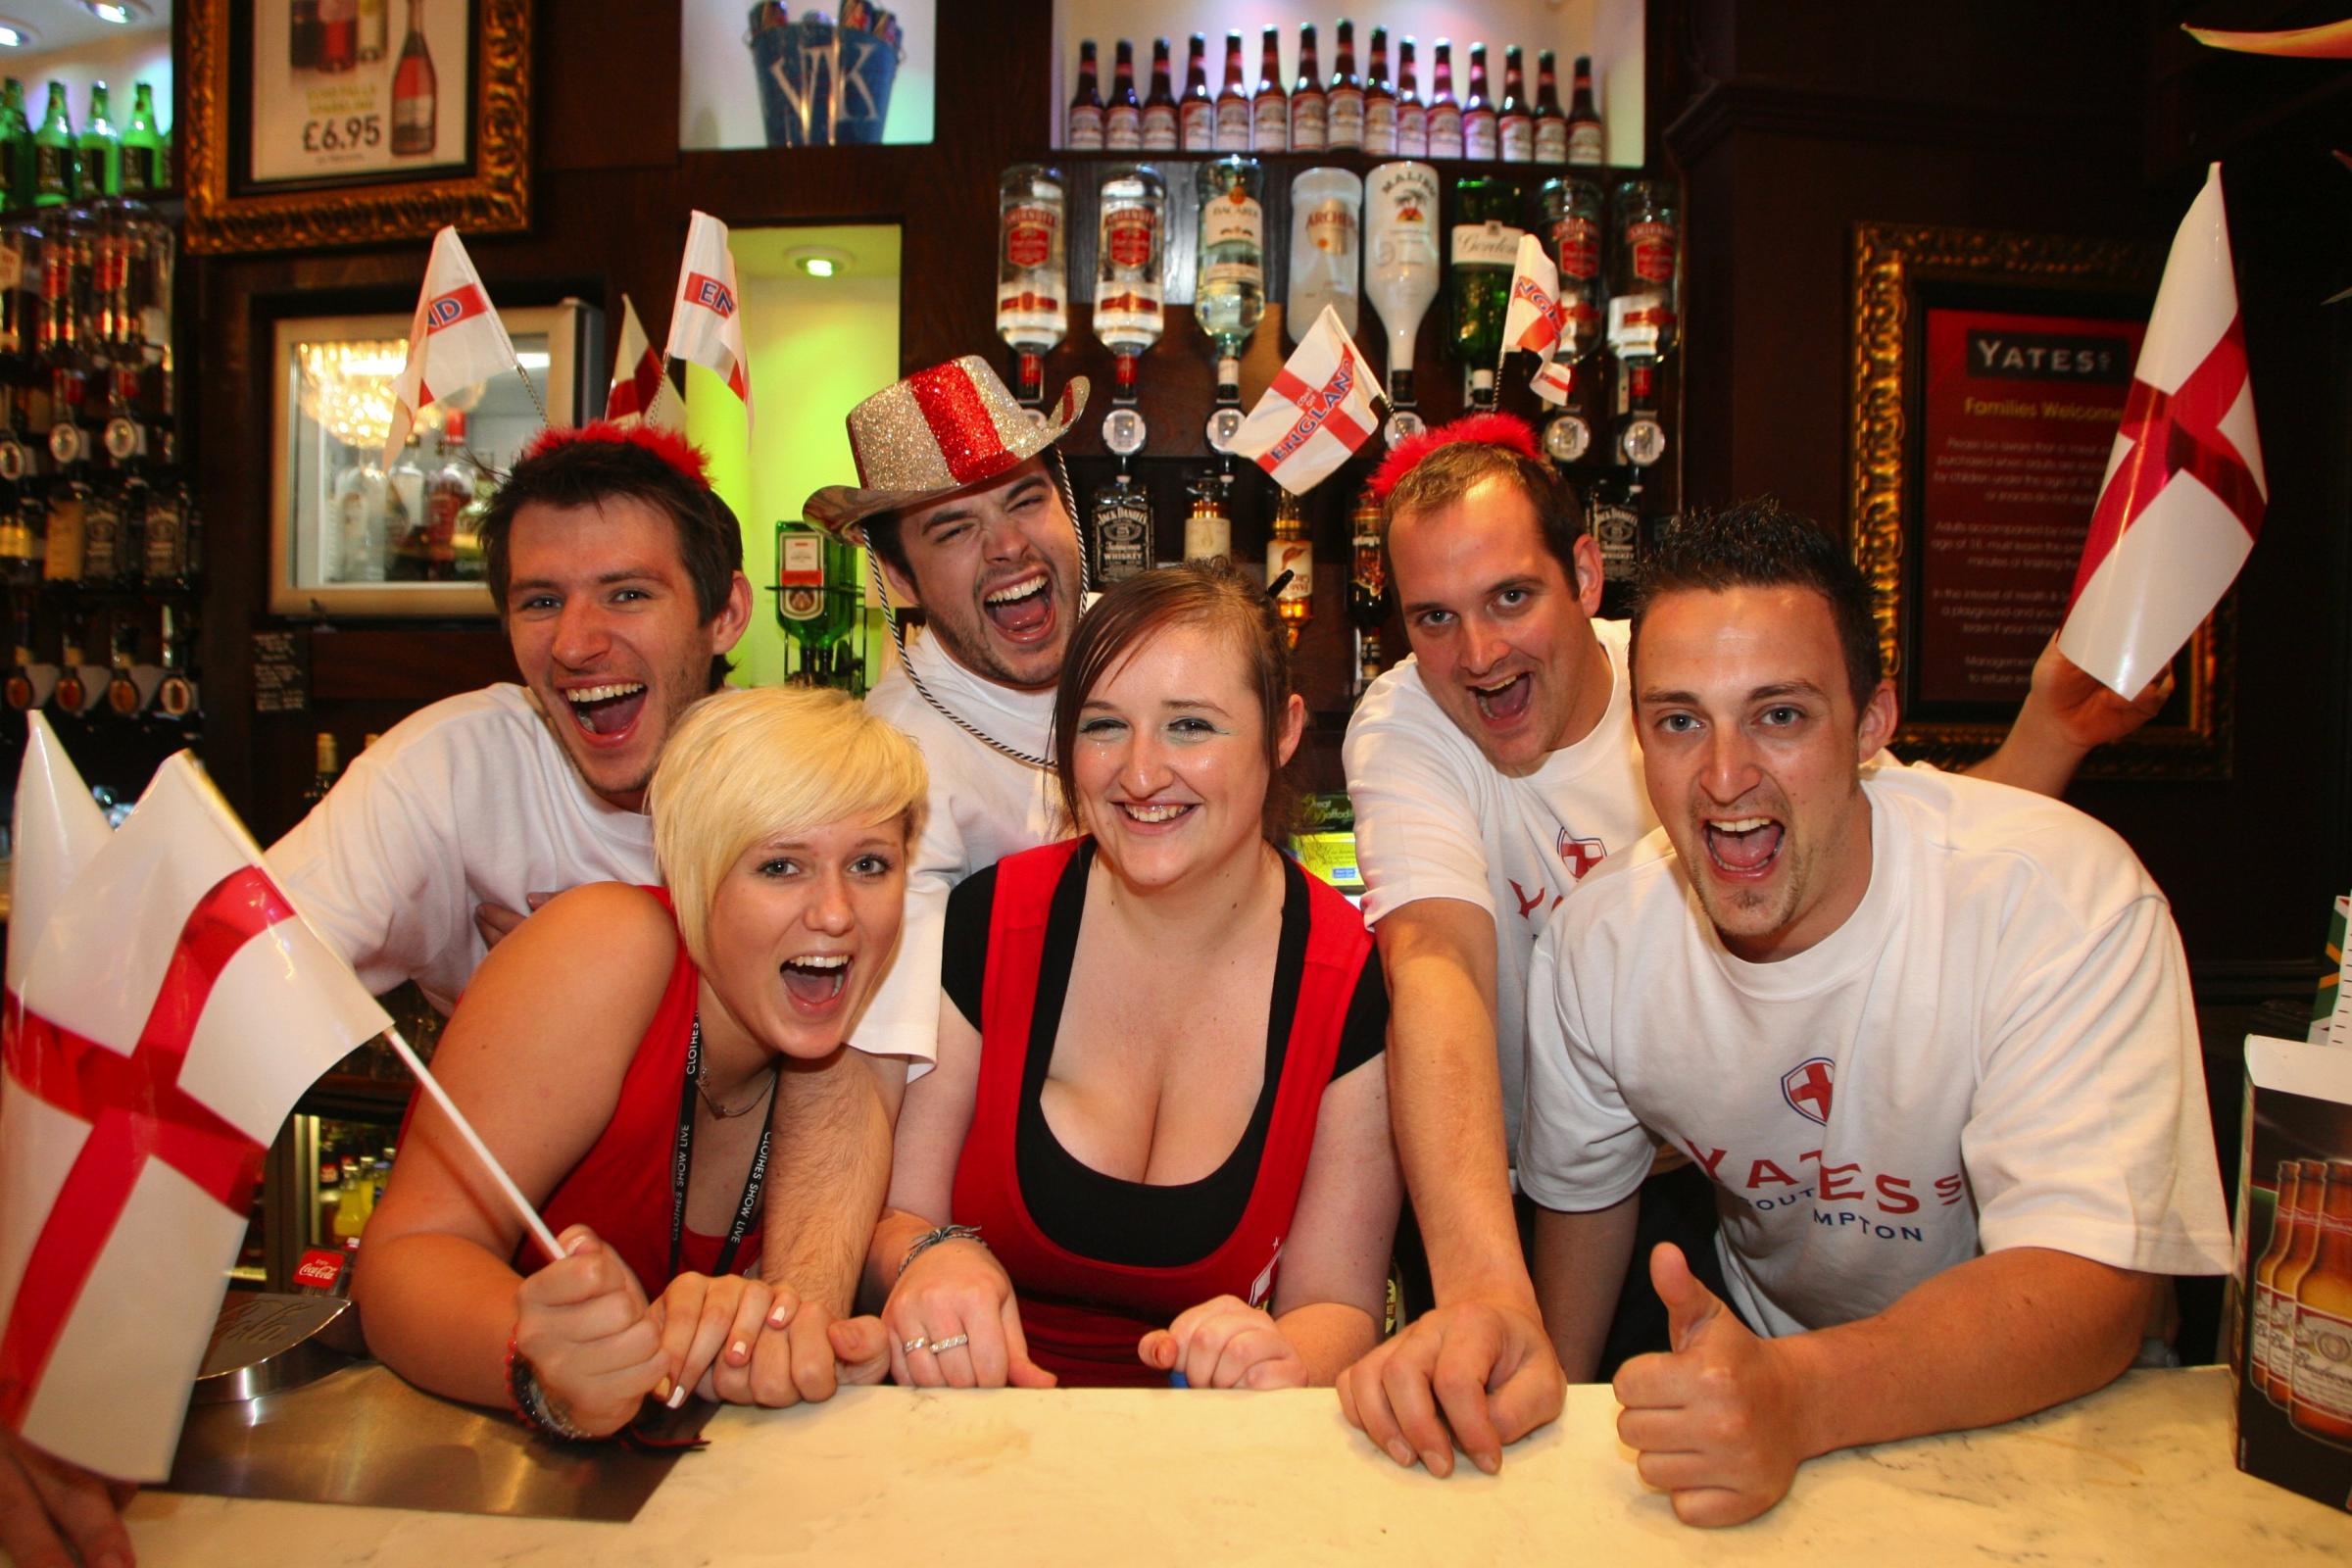 The staff at Yates in Southampton cheer on England ahead of their World Cup knockout match against Germany on Sunday, 27 June 2010 in South Africa.